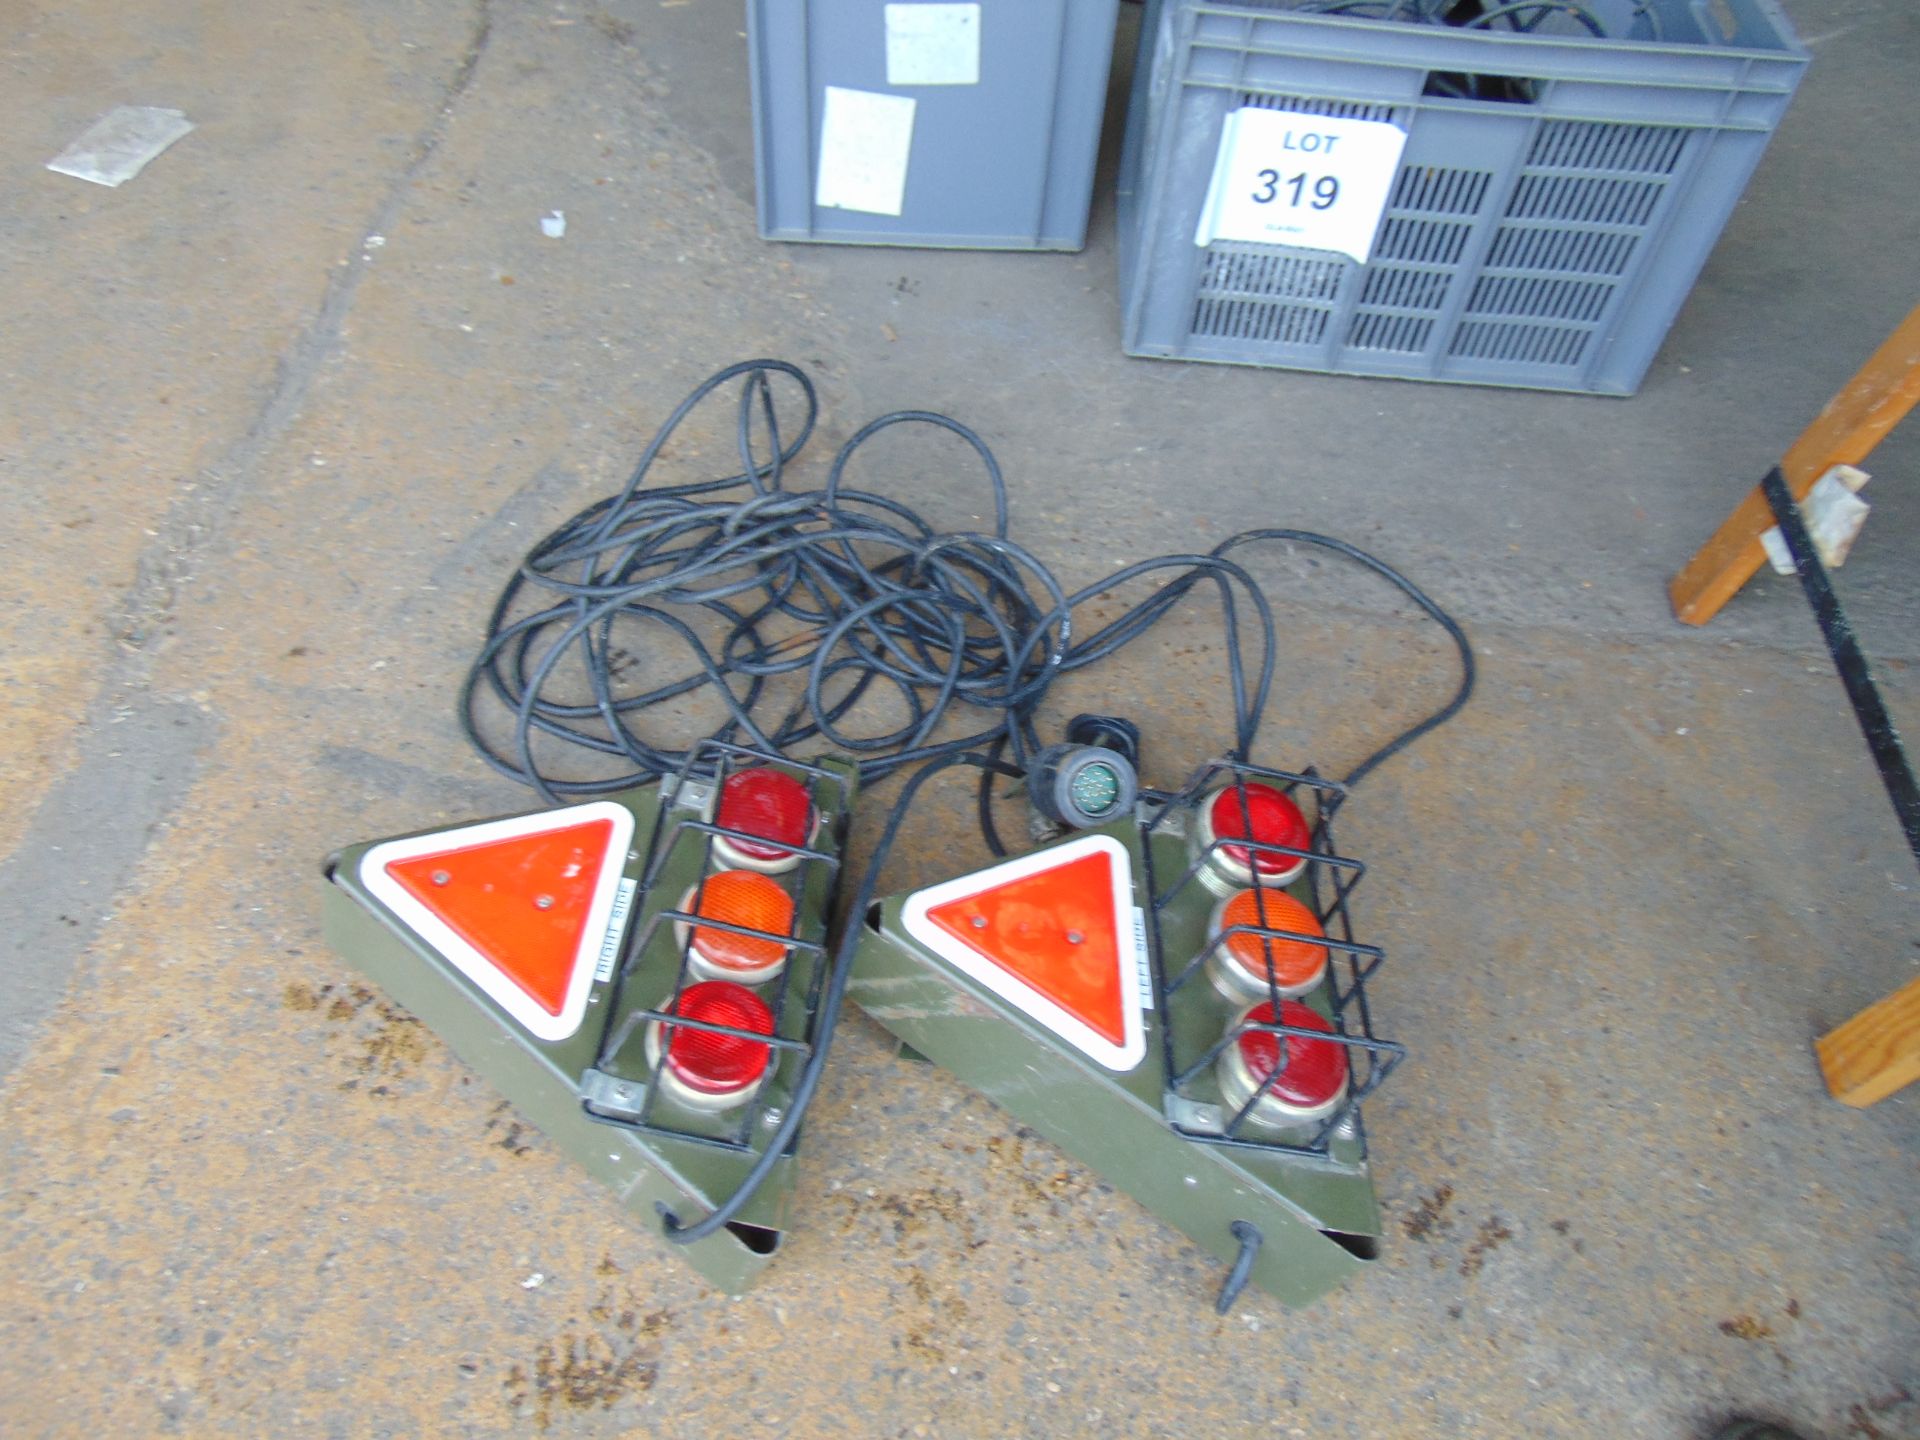 2 x Nrw Unissued Trailer Marker Light Kit c/w Cables and Nato Plugs - Image 3 of 5